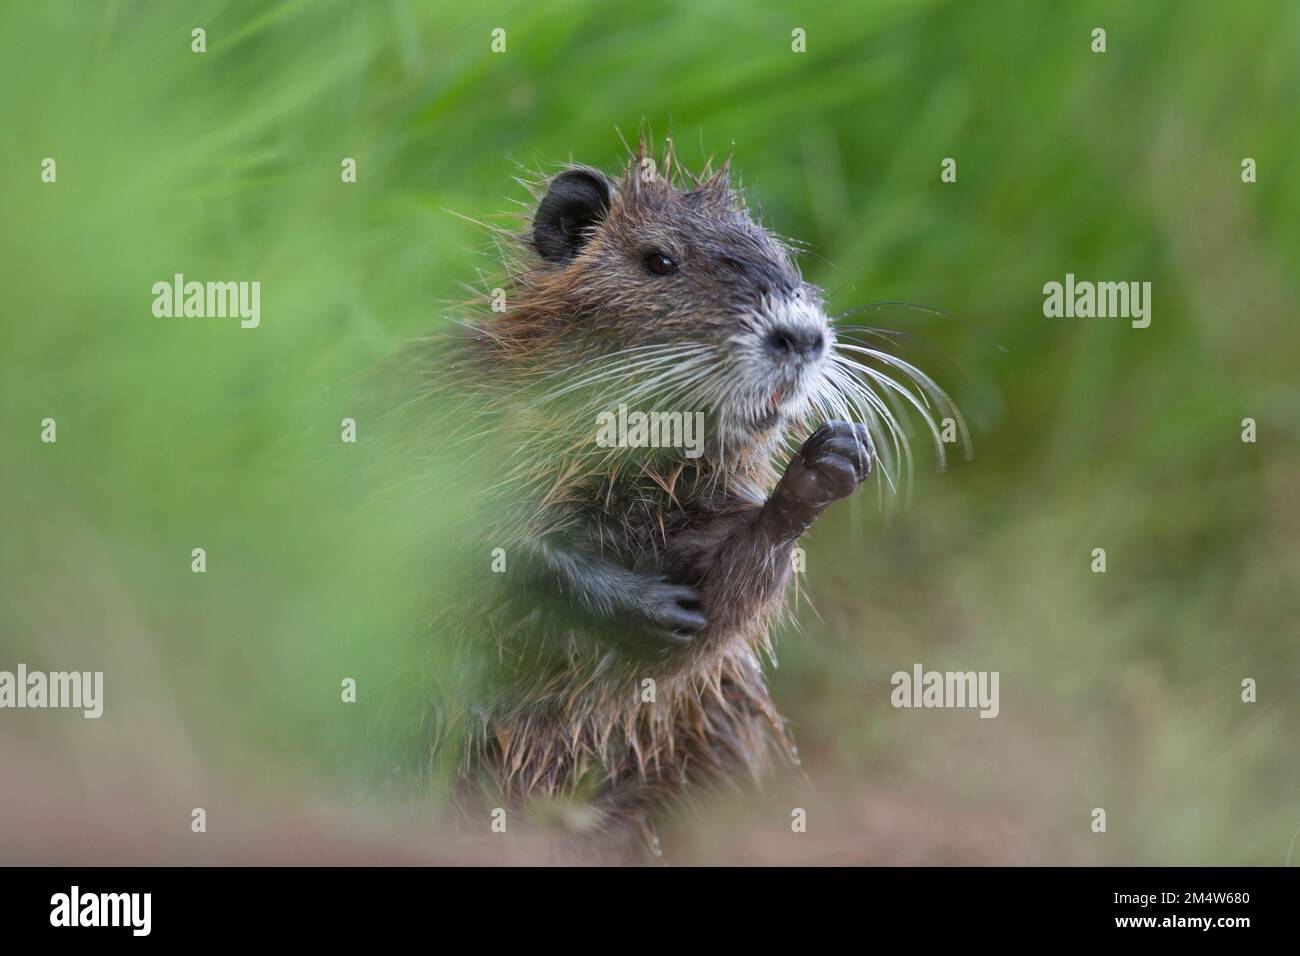 coypu, or nutria (Myocastor coypus)  is a herbivorous semi-aquatic rodent that feeds on river plants and lives in burrows along river banks. It is nat Stock Photo